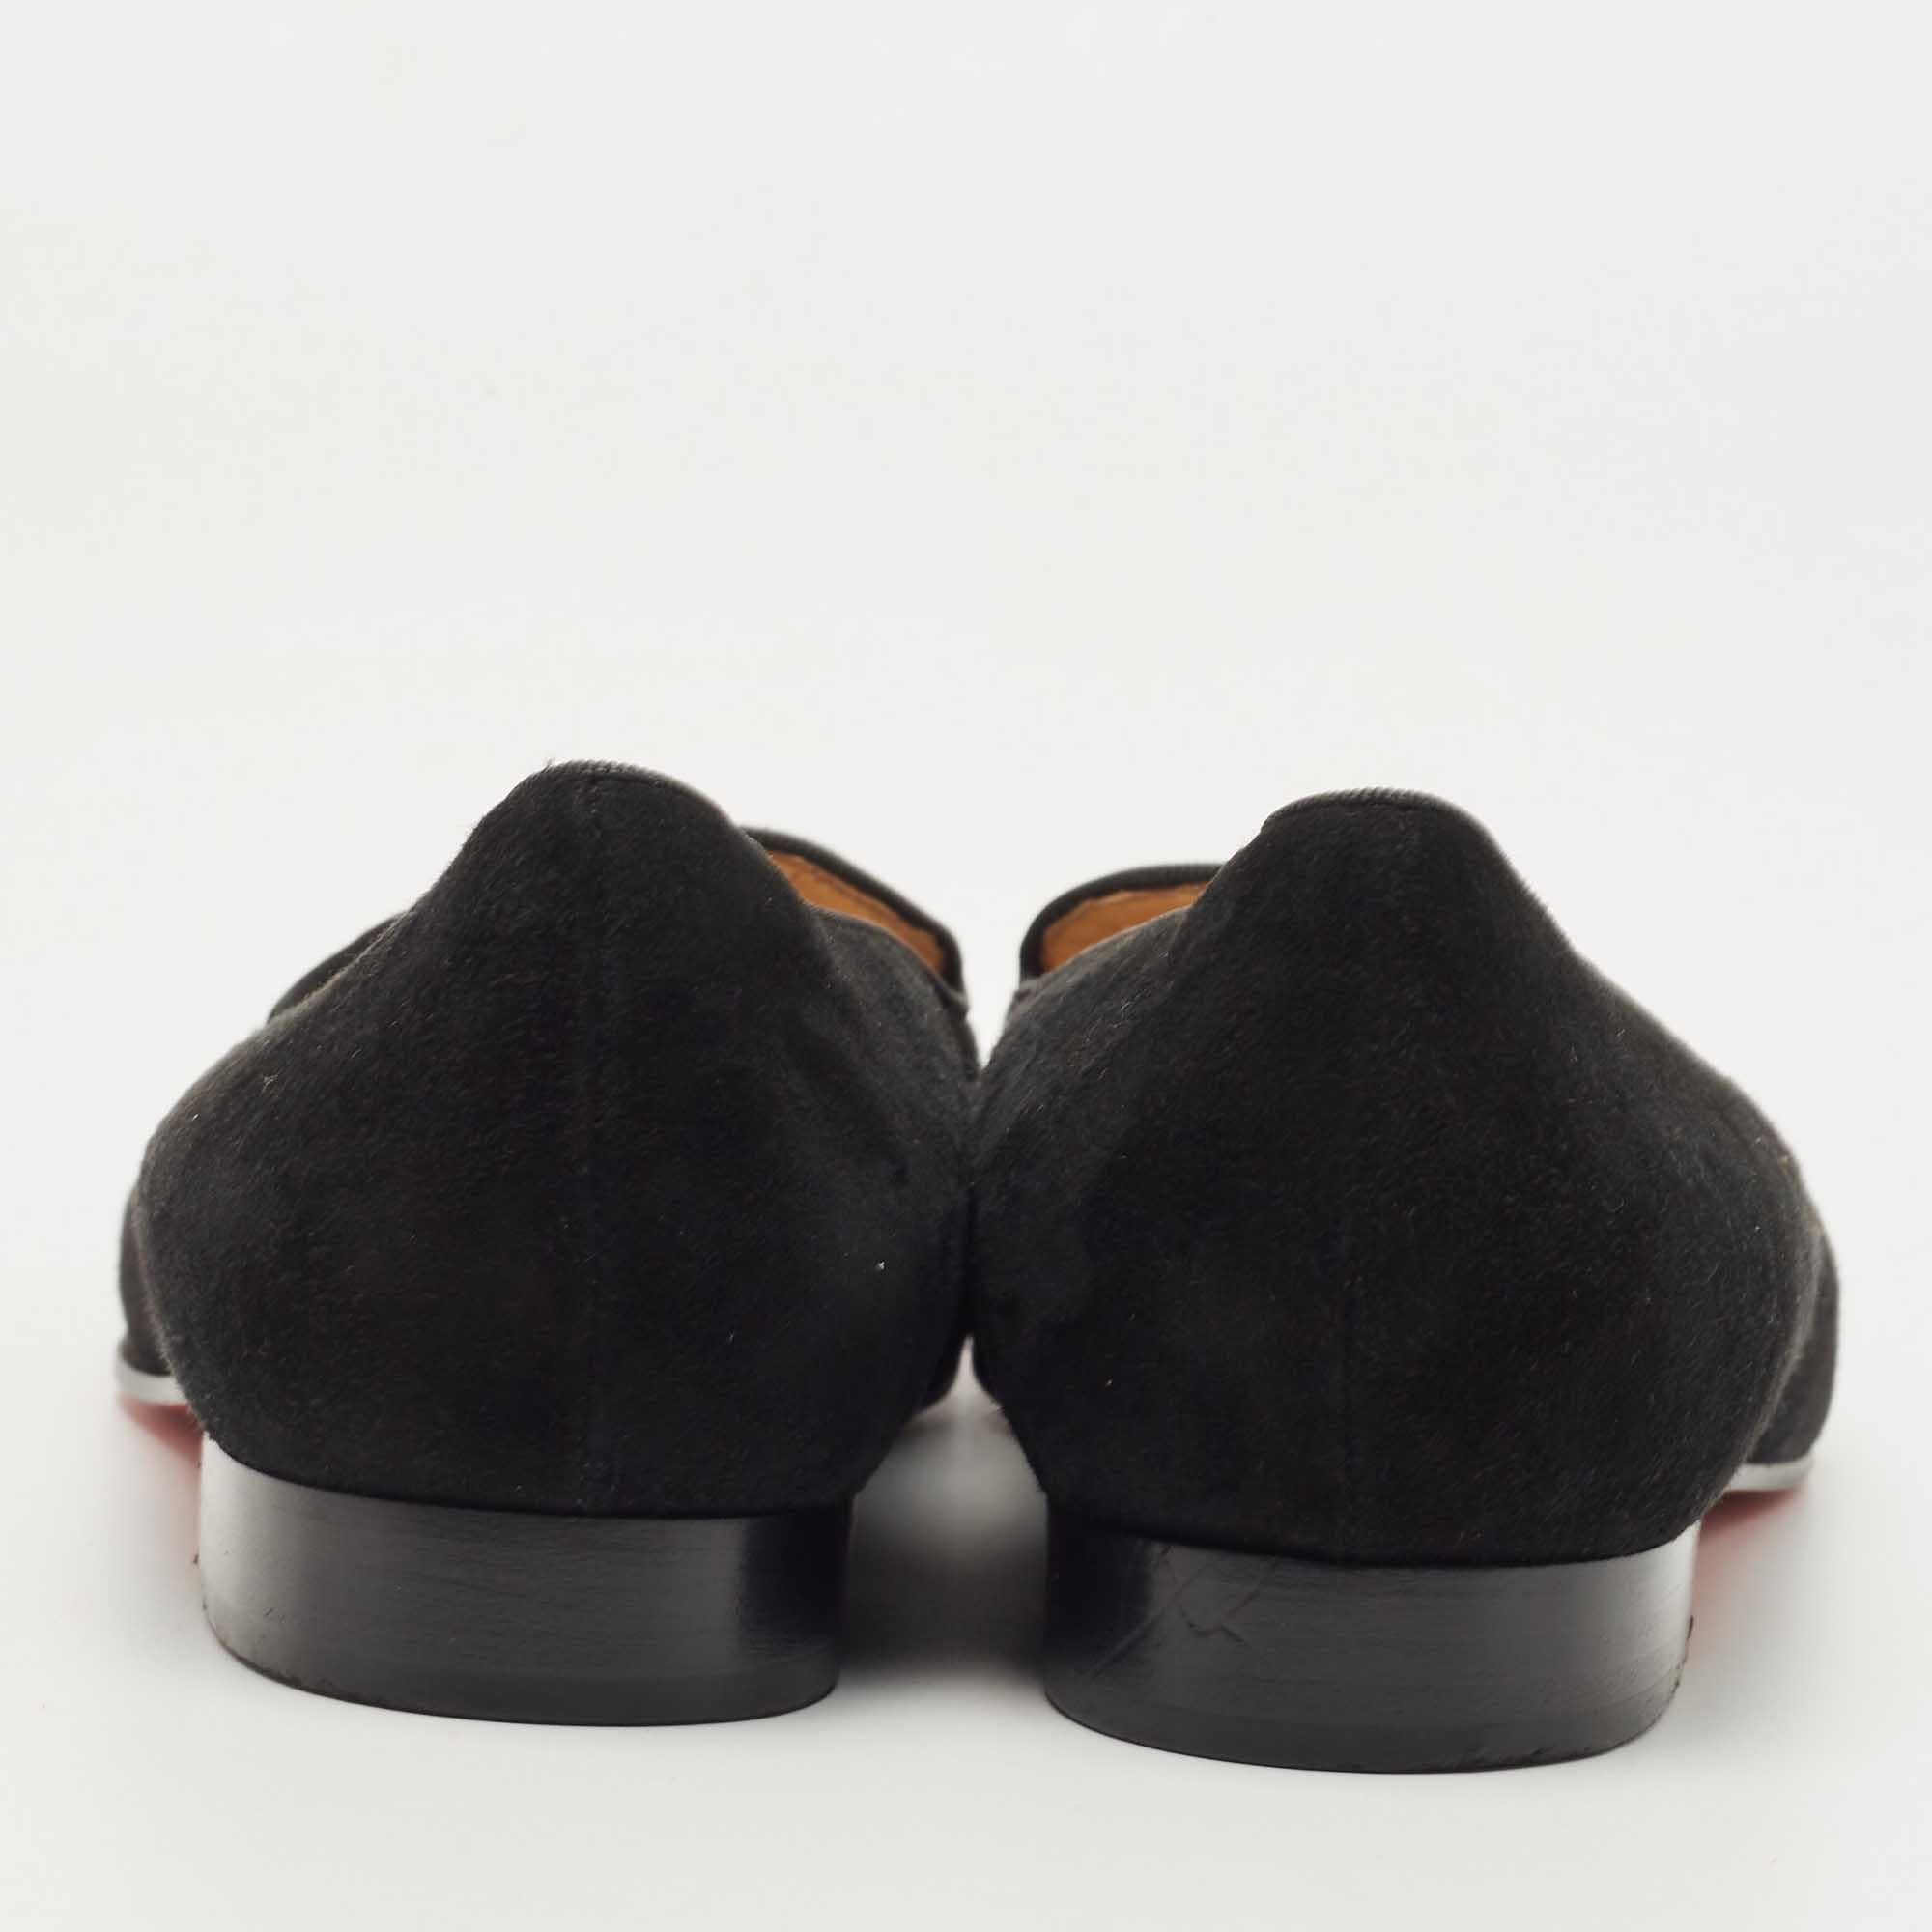 Christian Louboutin Black Suede Harvanana Spiked Smoking Slippers Size 36.5